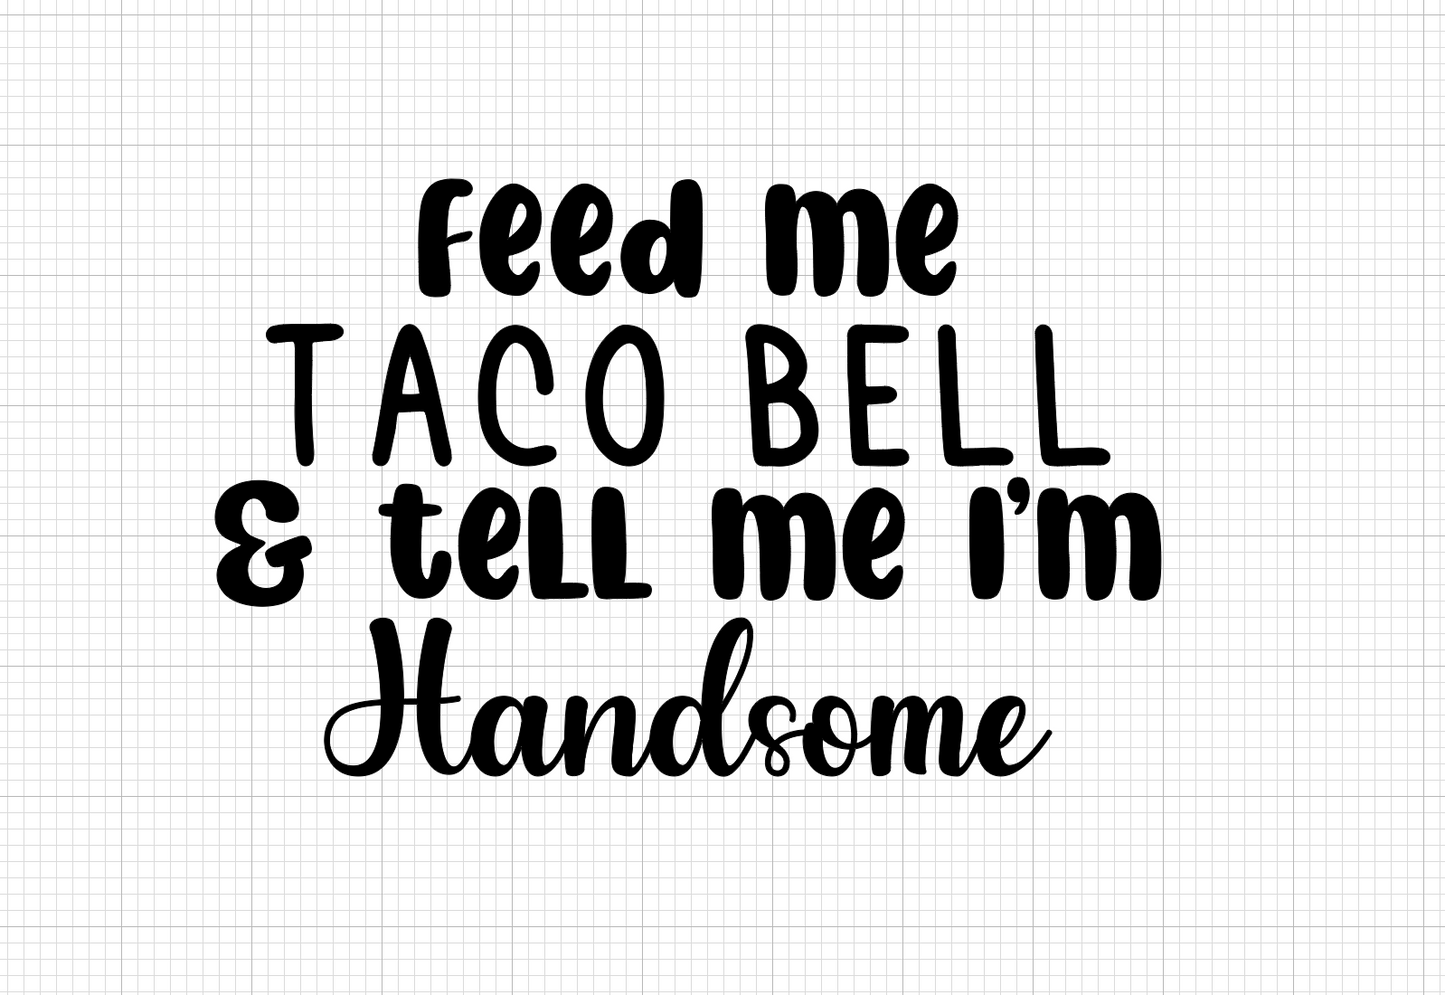 Feed me tacos Handsome Vinyl Add-on